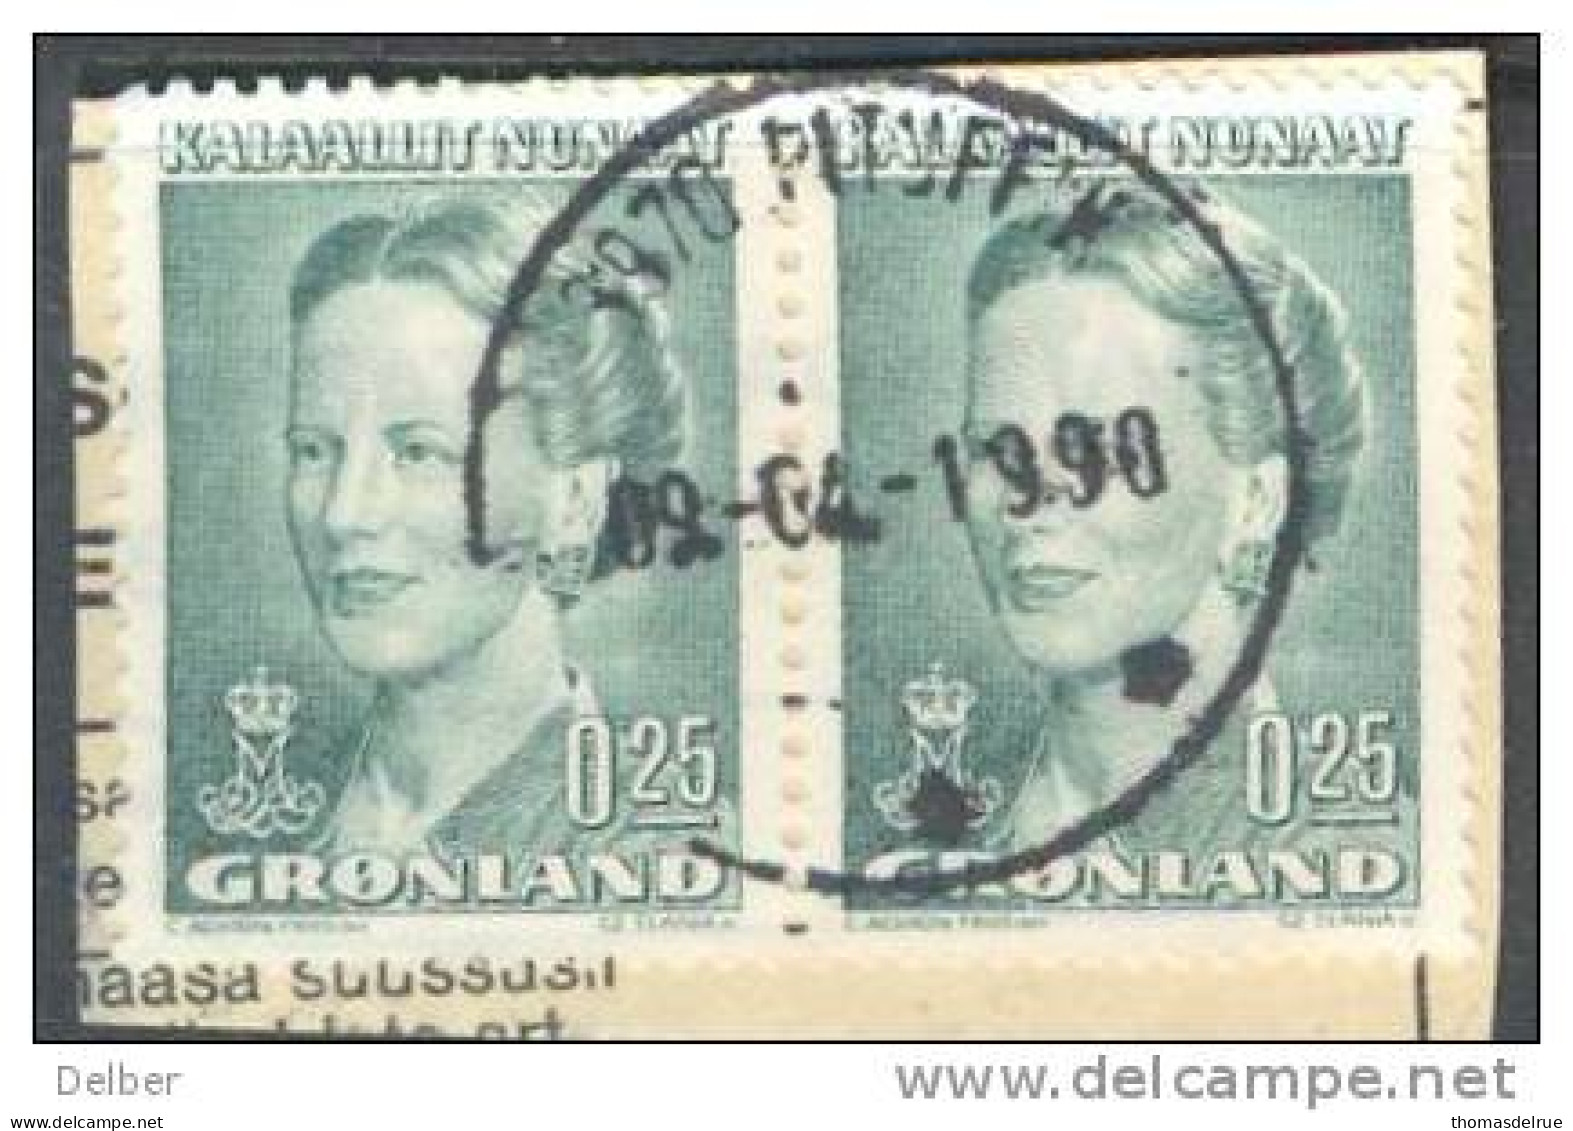 _If511: Groenland: FAC.N° 201 : Paar : 3970  PITUFFIN - Used Stamps